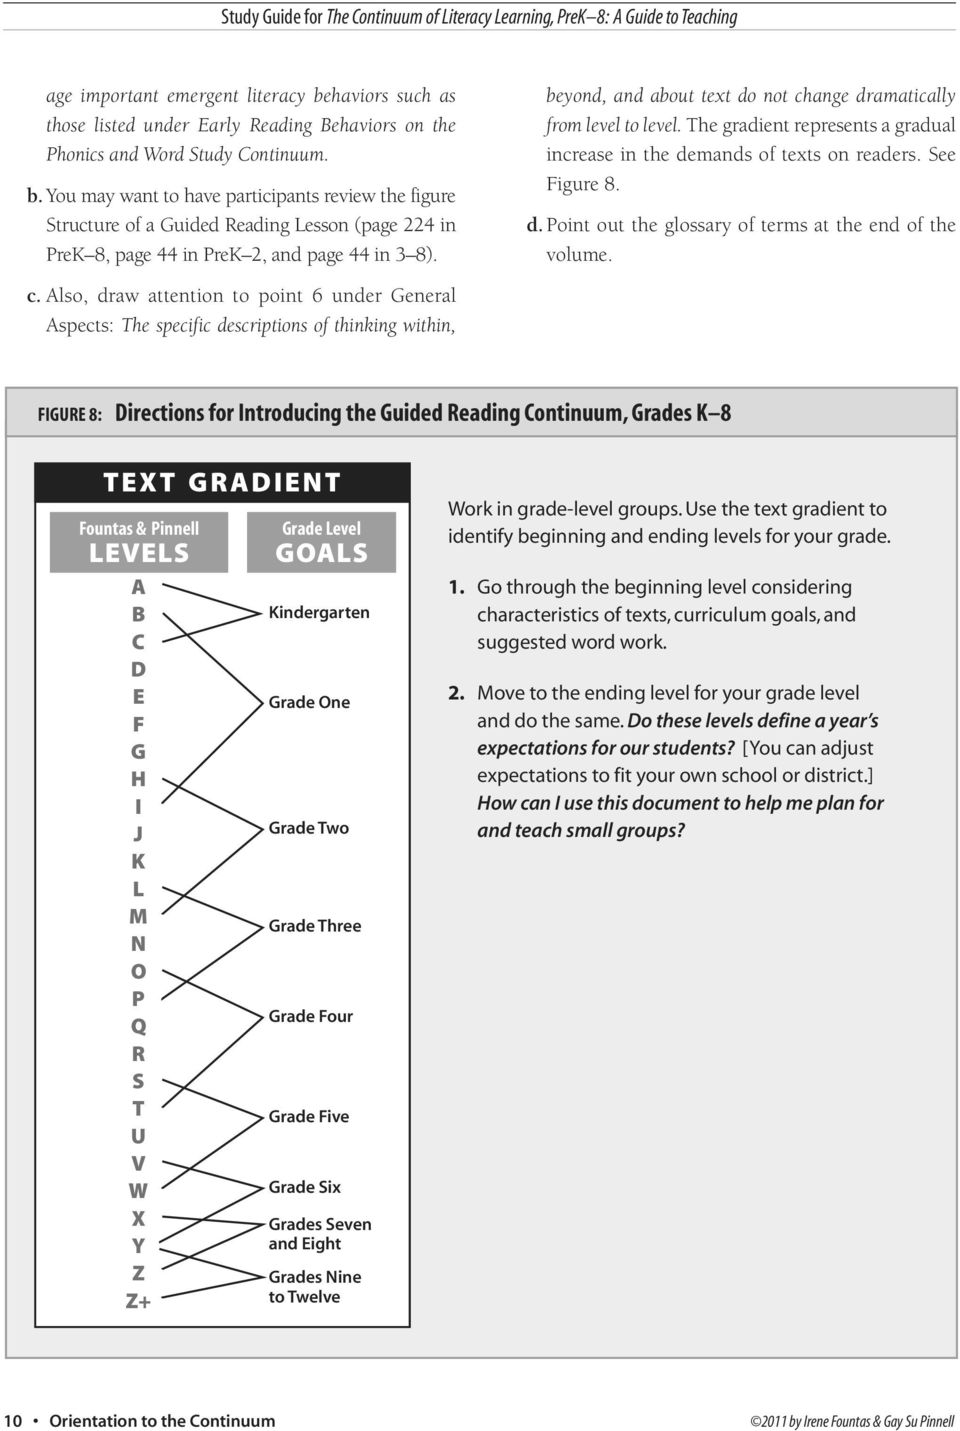 StudyGuide. Irene C. Fountas Gay Su Pinnell - PDF Free Download In Guided Reading Lesson Plan Template Fountas And Pinnell